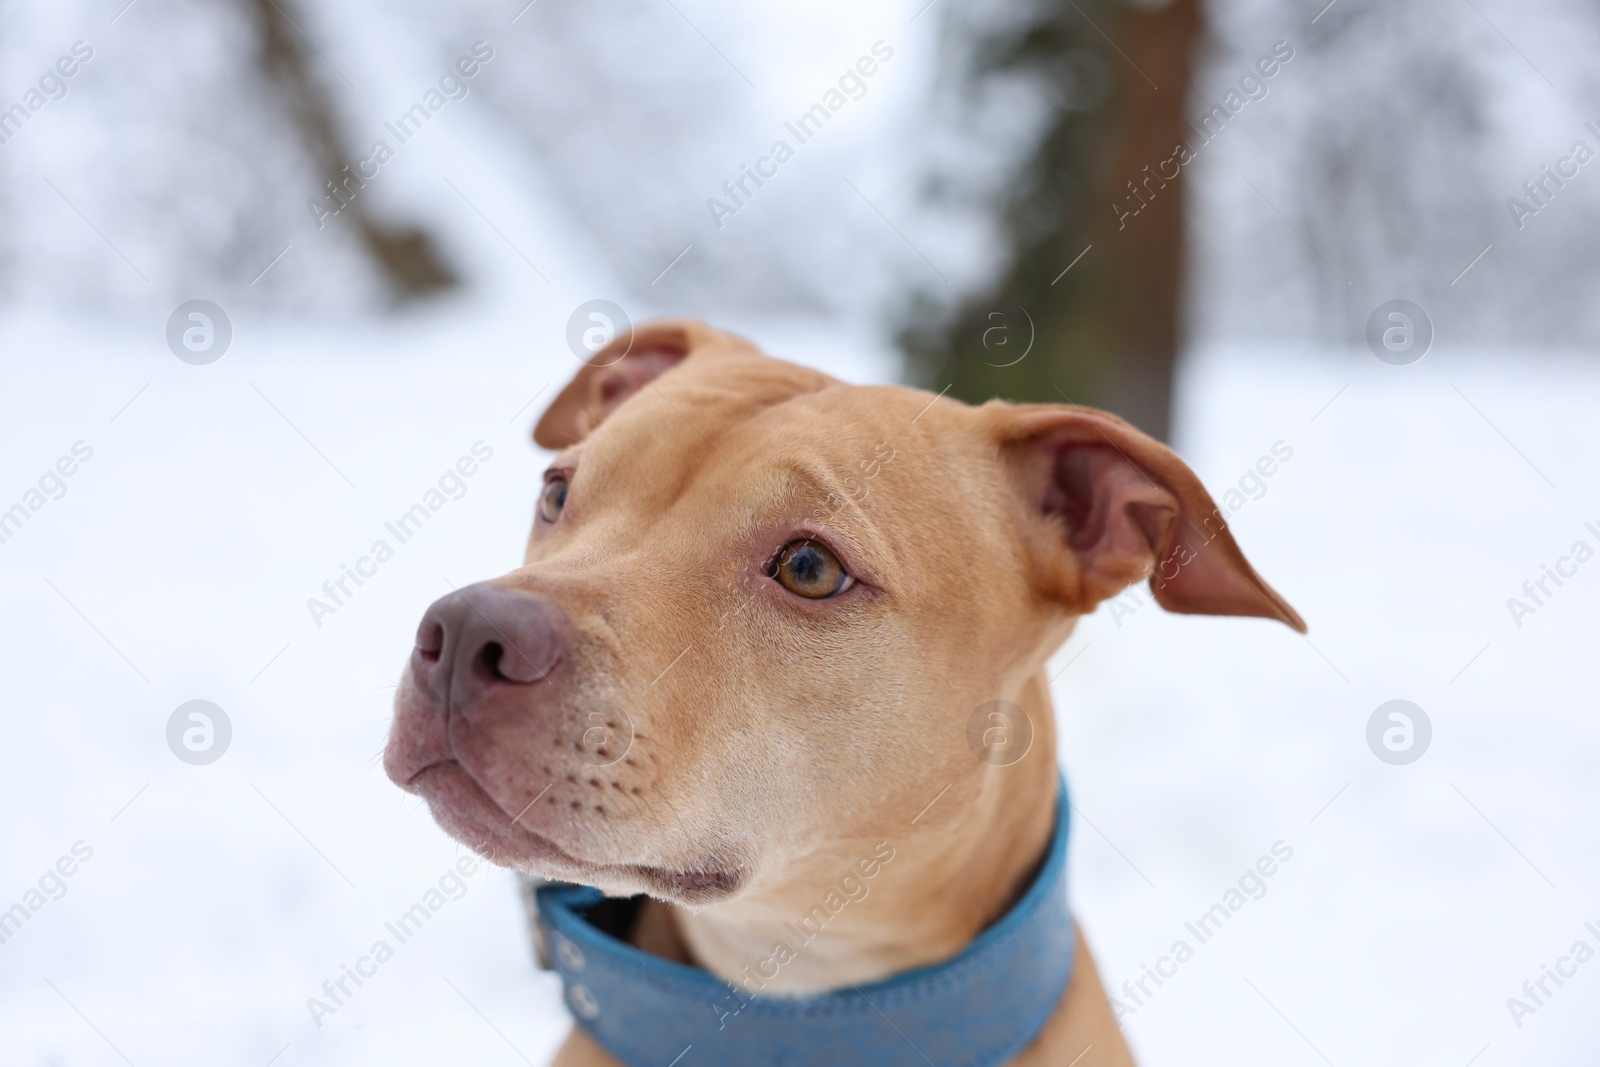 Photo of Portrait of cute dog in snowy park